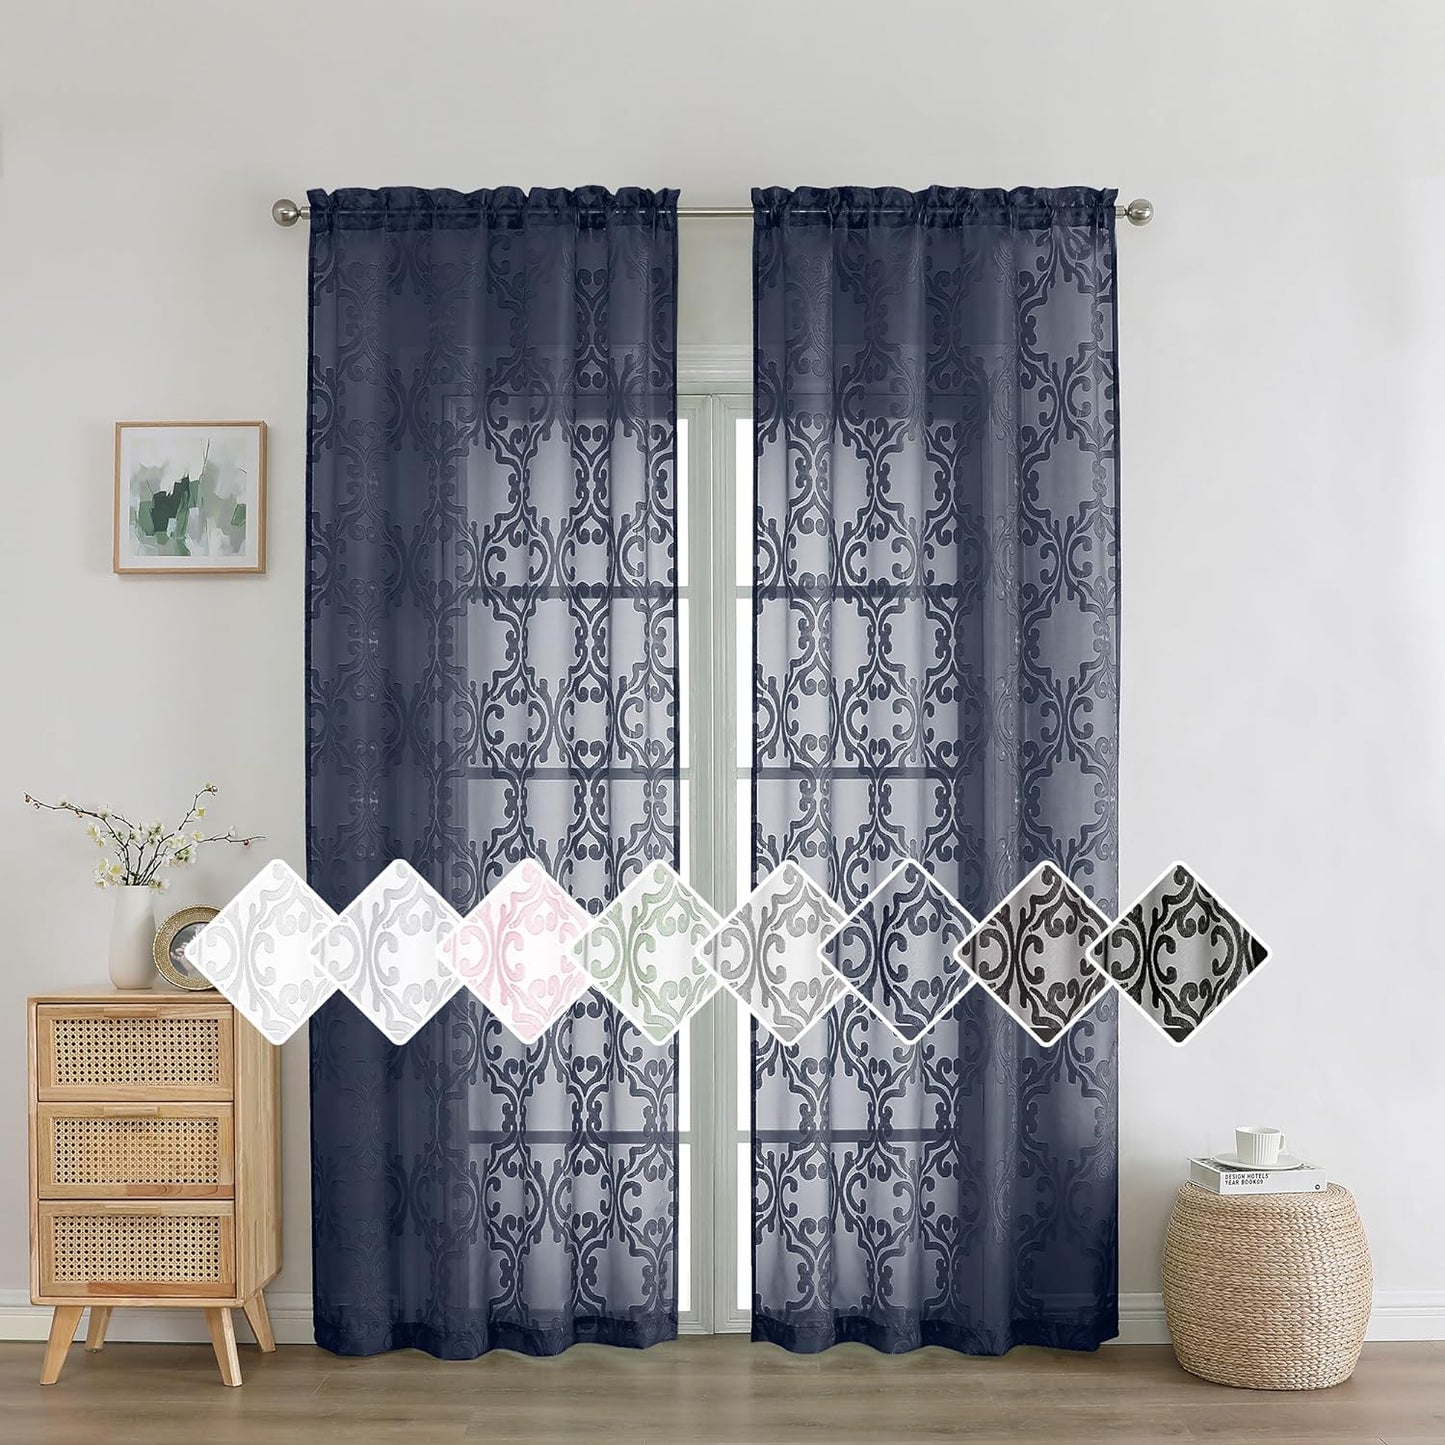 Aiyufeng Suri 2 Panels Sheer Sage Green Curtains 63 Inches Long, Light & Airy Privacy Textured Sheer Drapes, Dual Rod Pocket Voile Clipped Floral Luxury Panels for Bedroom Living Room, 42 X 63 Inch  Aiyufeng Navy Blue 2X42X84" 